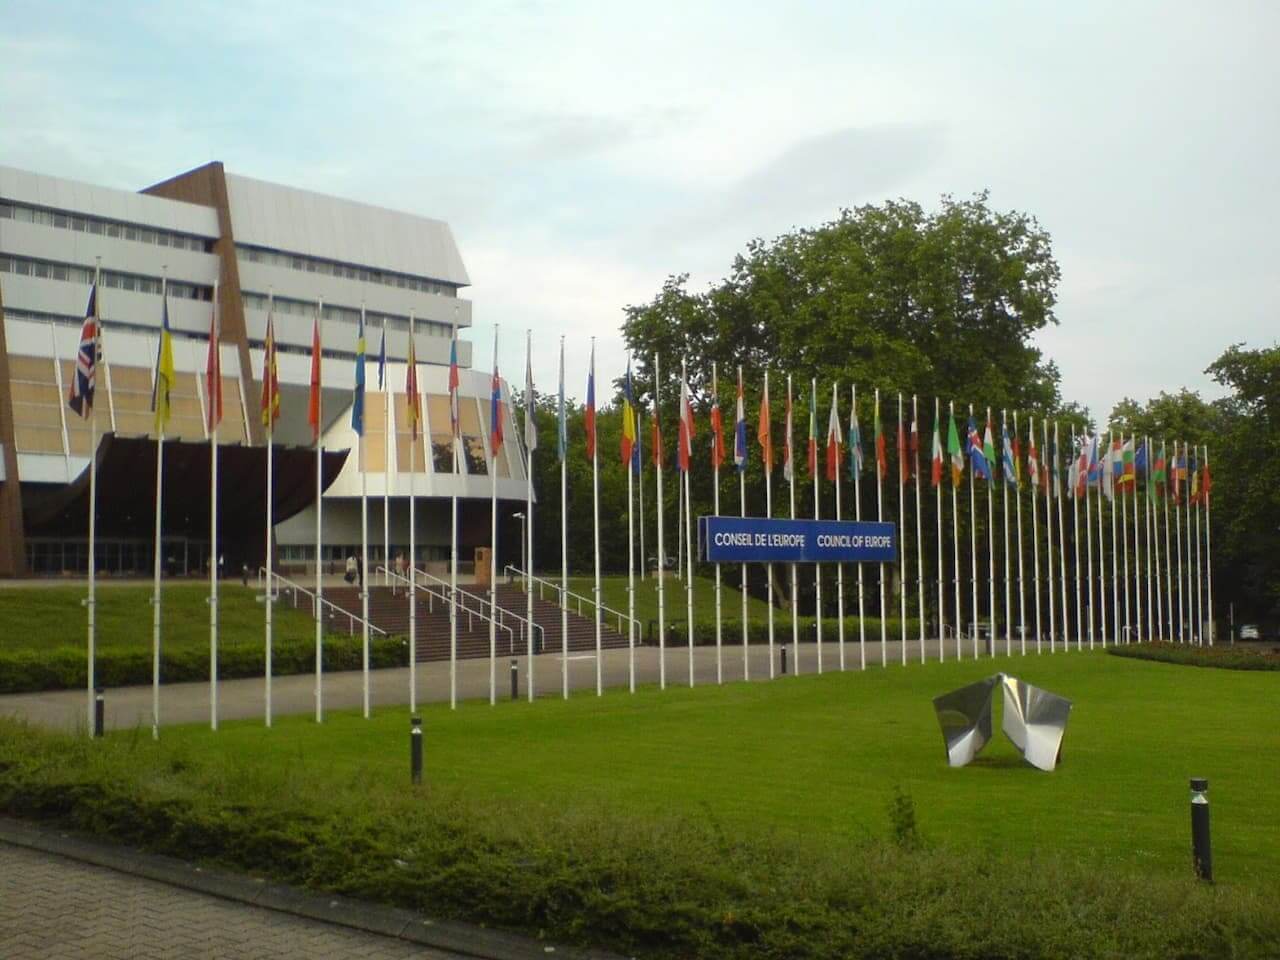 Council of Europe building in Strasbourg